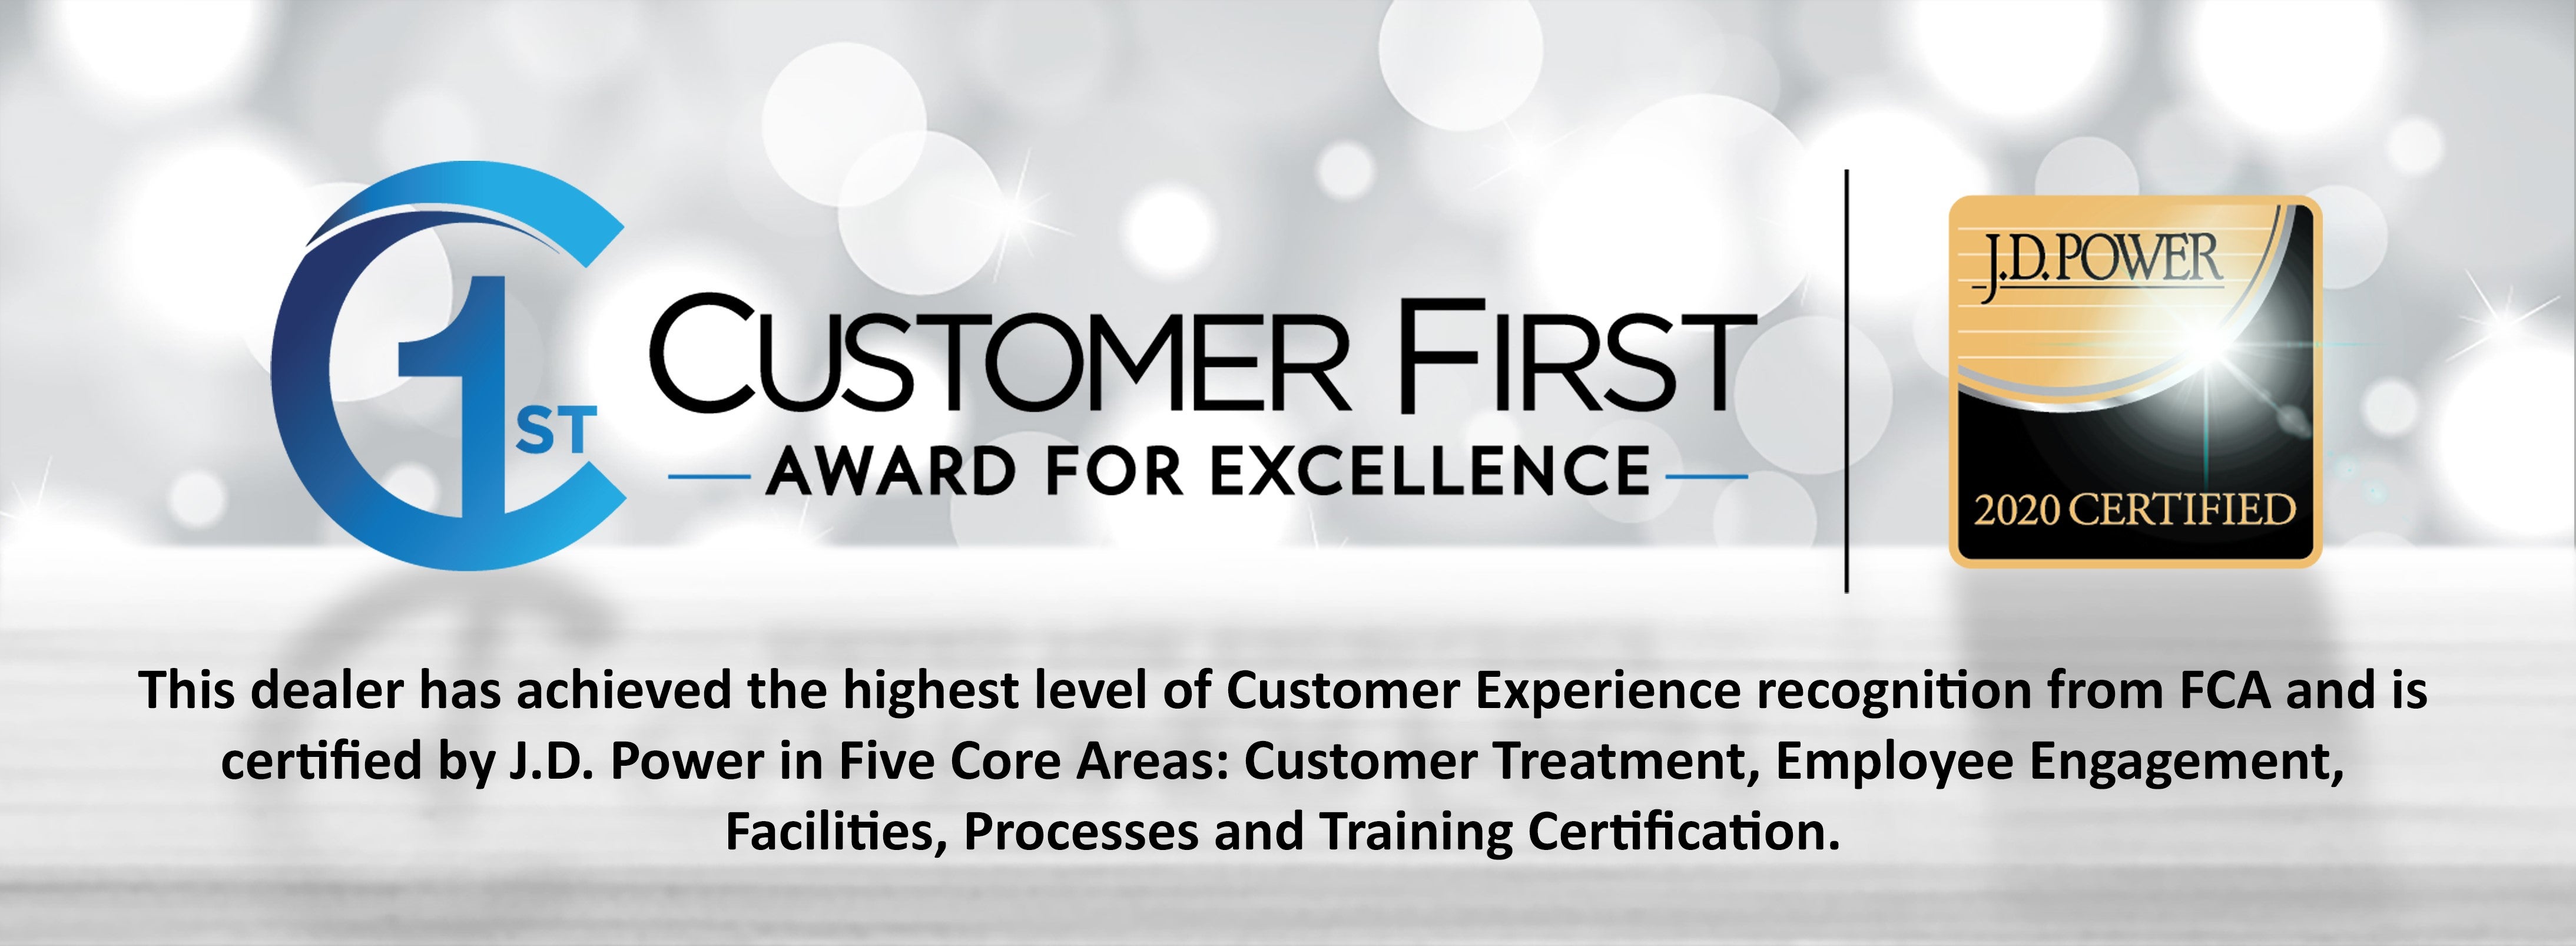 Customer First Award for Excellence for 2019 at Glendenning Motor Co CDJR in Mt Ayr, IA